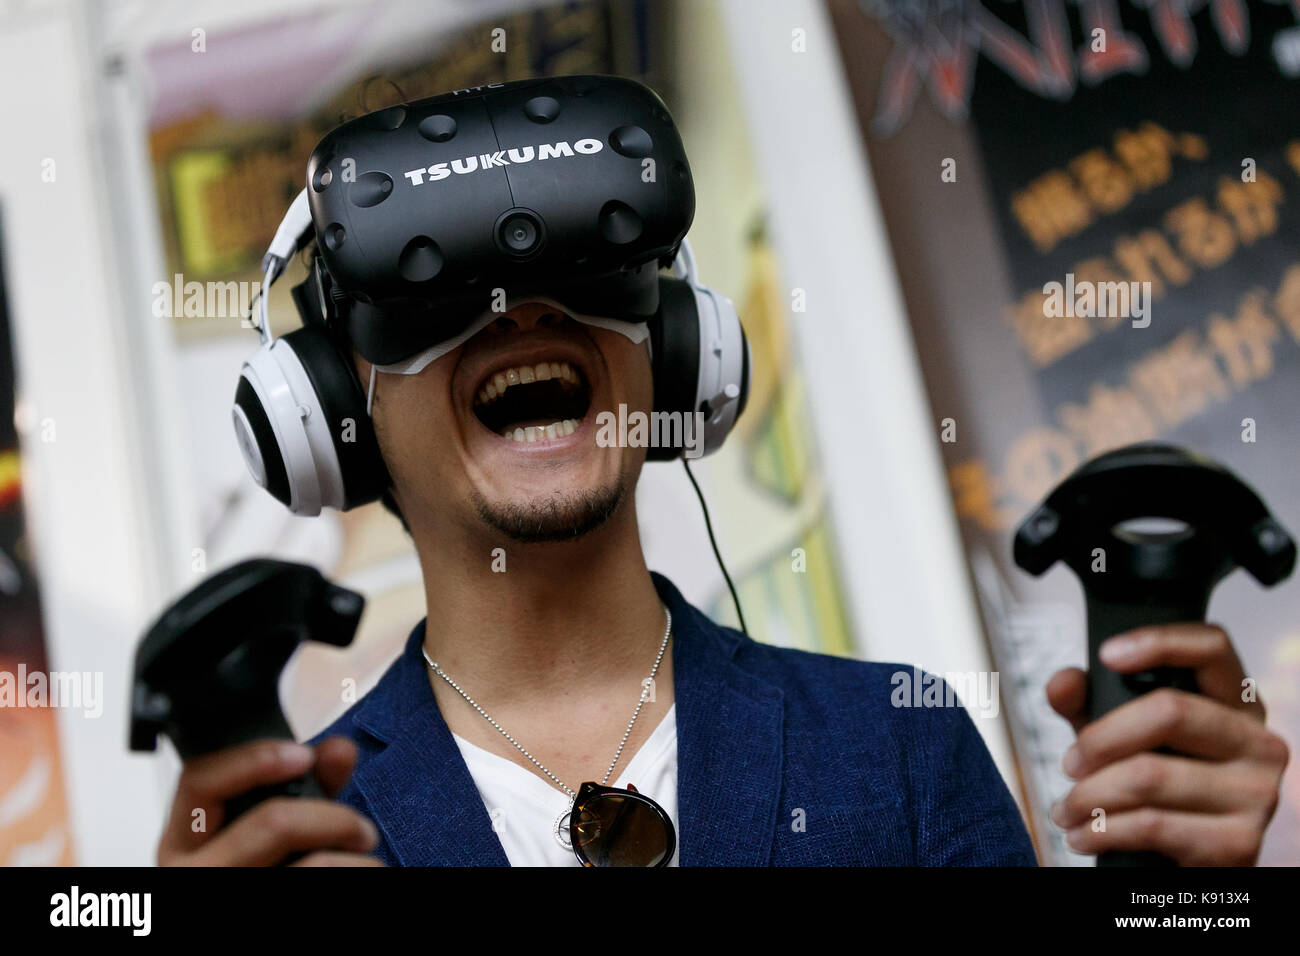 Chiba, Japan. 21st Sep, 2017. Visitors test a virtual reality glasses at the Tokyo Game Show (TGS 2017) on September 21, 2017, Chiba, Japan. This year's event hosts 609 companies from 36 different countries, introducing 1,317 video game titles for smartphones, games consoles, VR, AR and MR platforms. The show, which expects to attract 250,000 visitors, runs until September 24 at the International Convention Complex Makuhari Messe in Chiba; and will be streamed live around the world. Credit: Rodrigo Reyes Marin/AFLO/Alamy Live News Stock Photo